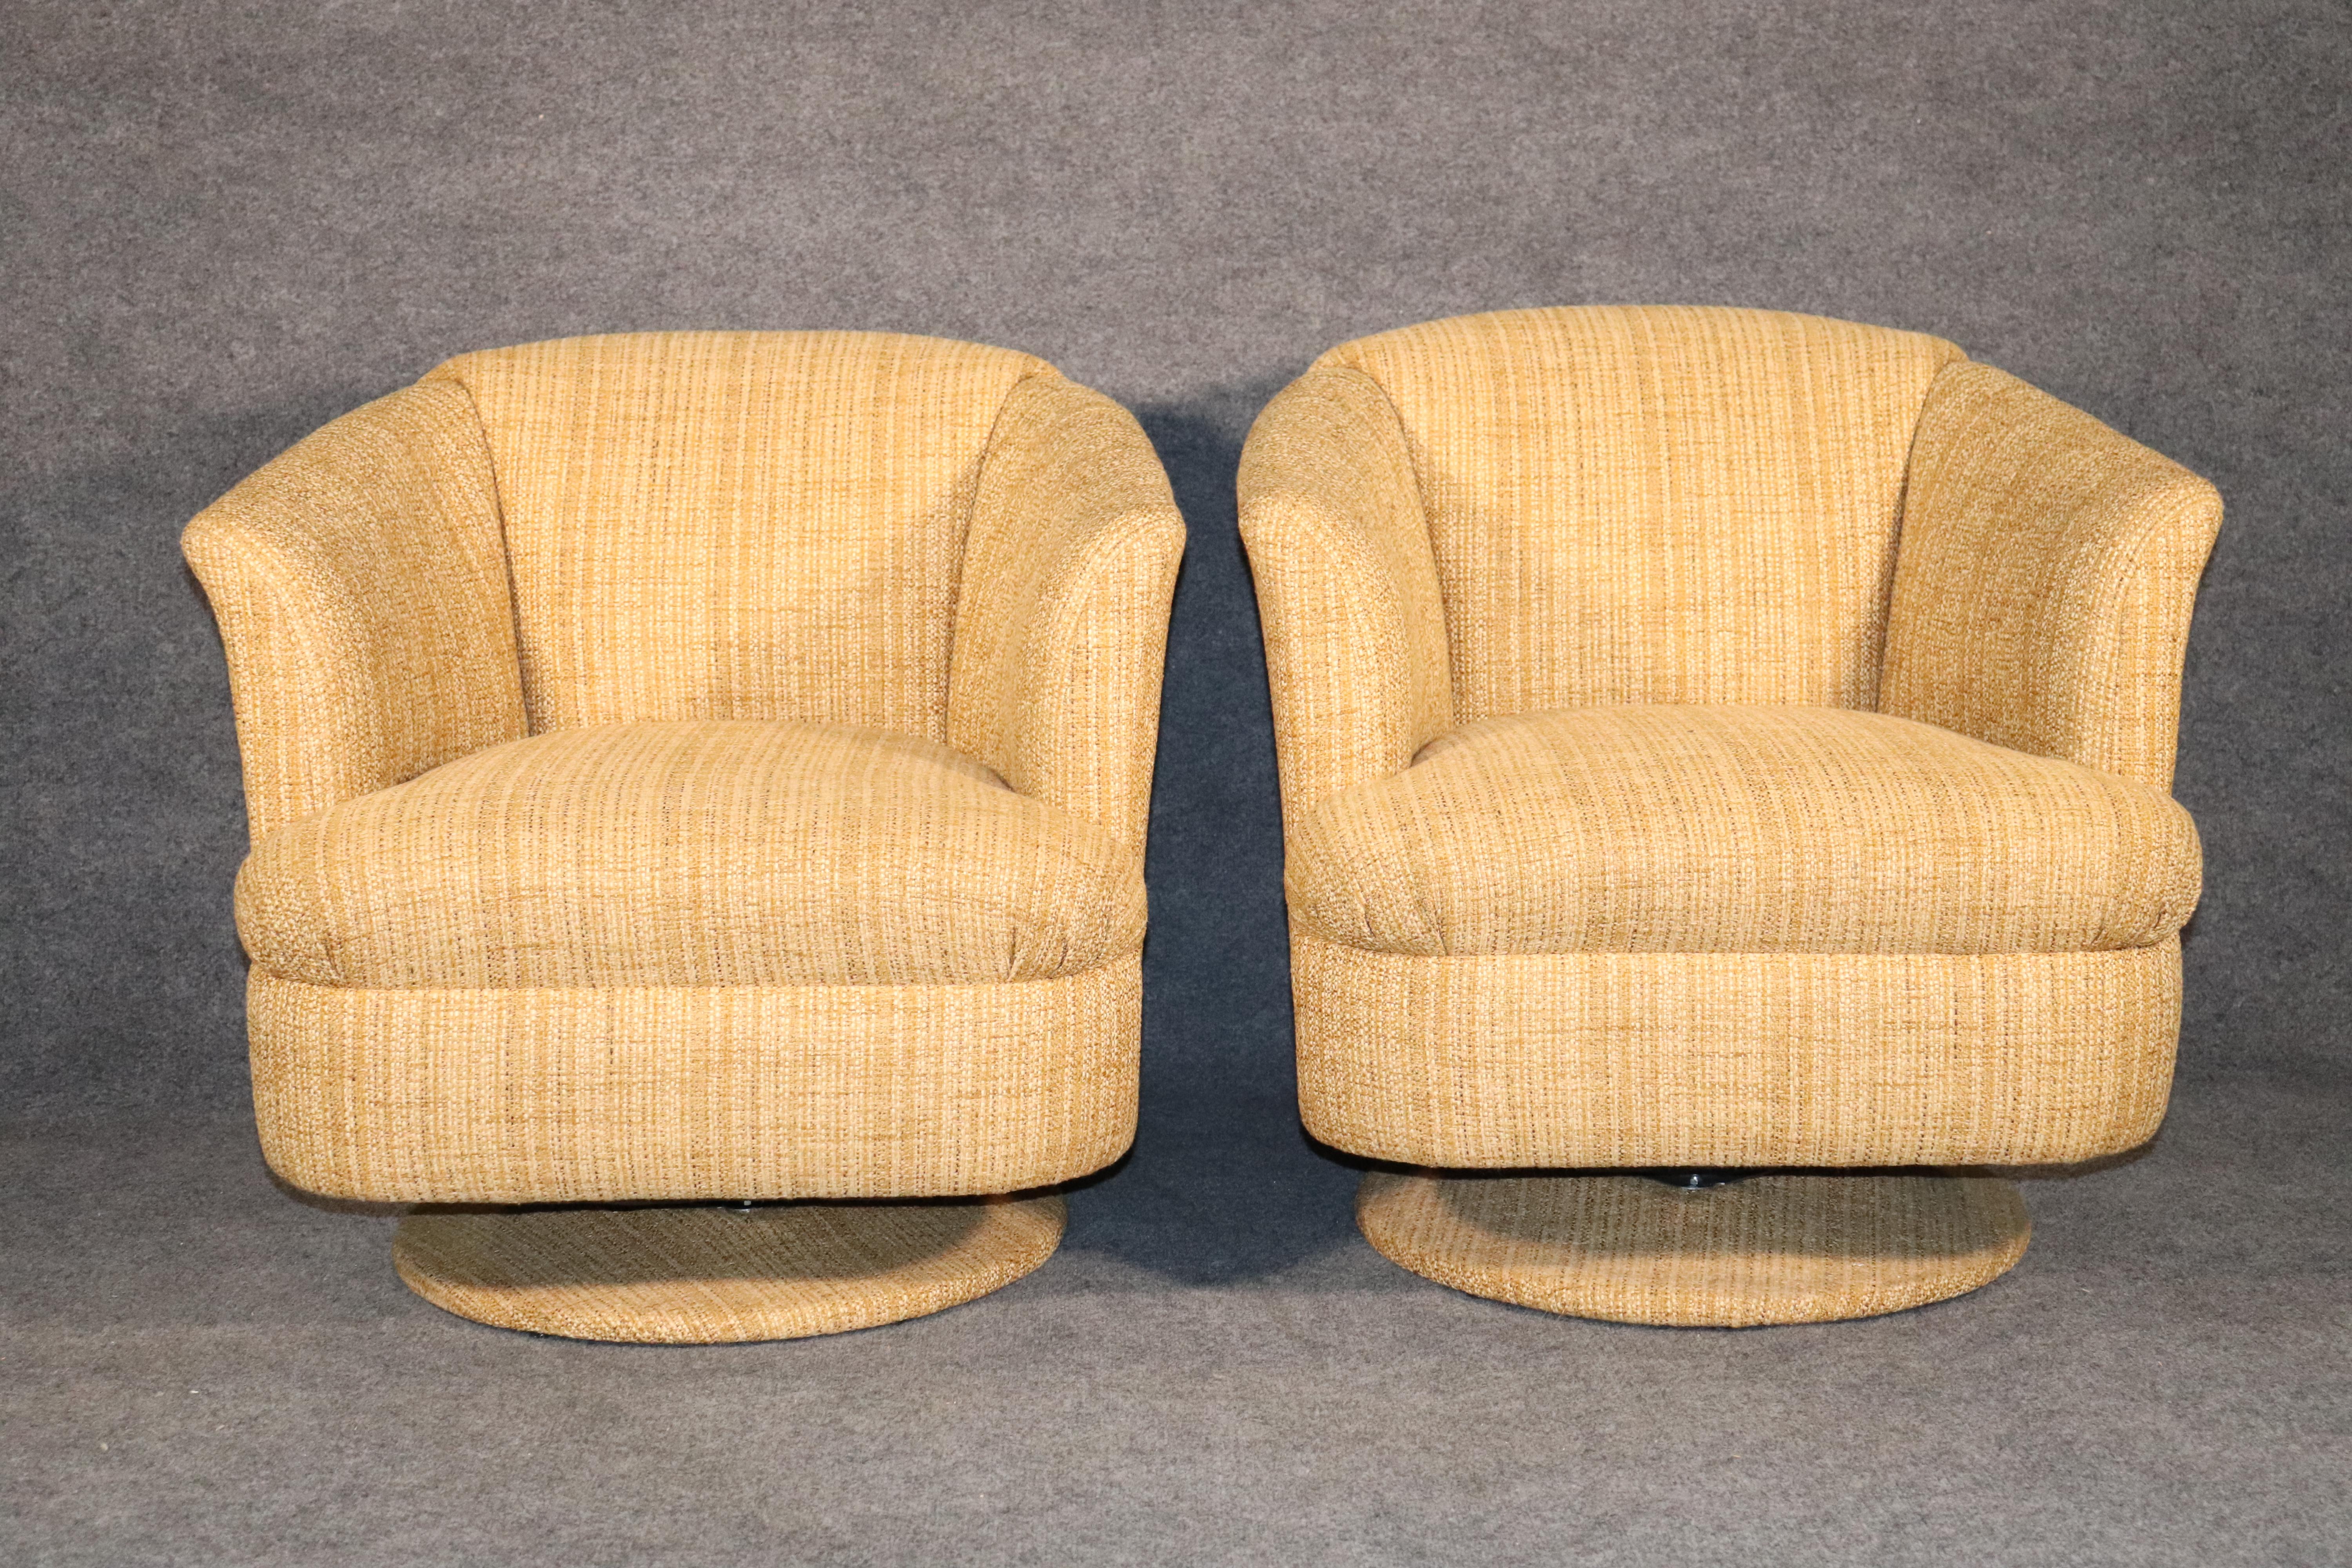 Pair of vintage modern club chairs on a tulip shape swivel base. Round barrel back with sculpting arm lines.
Please confirm location.